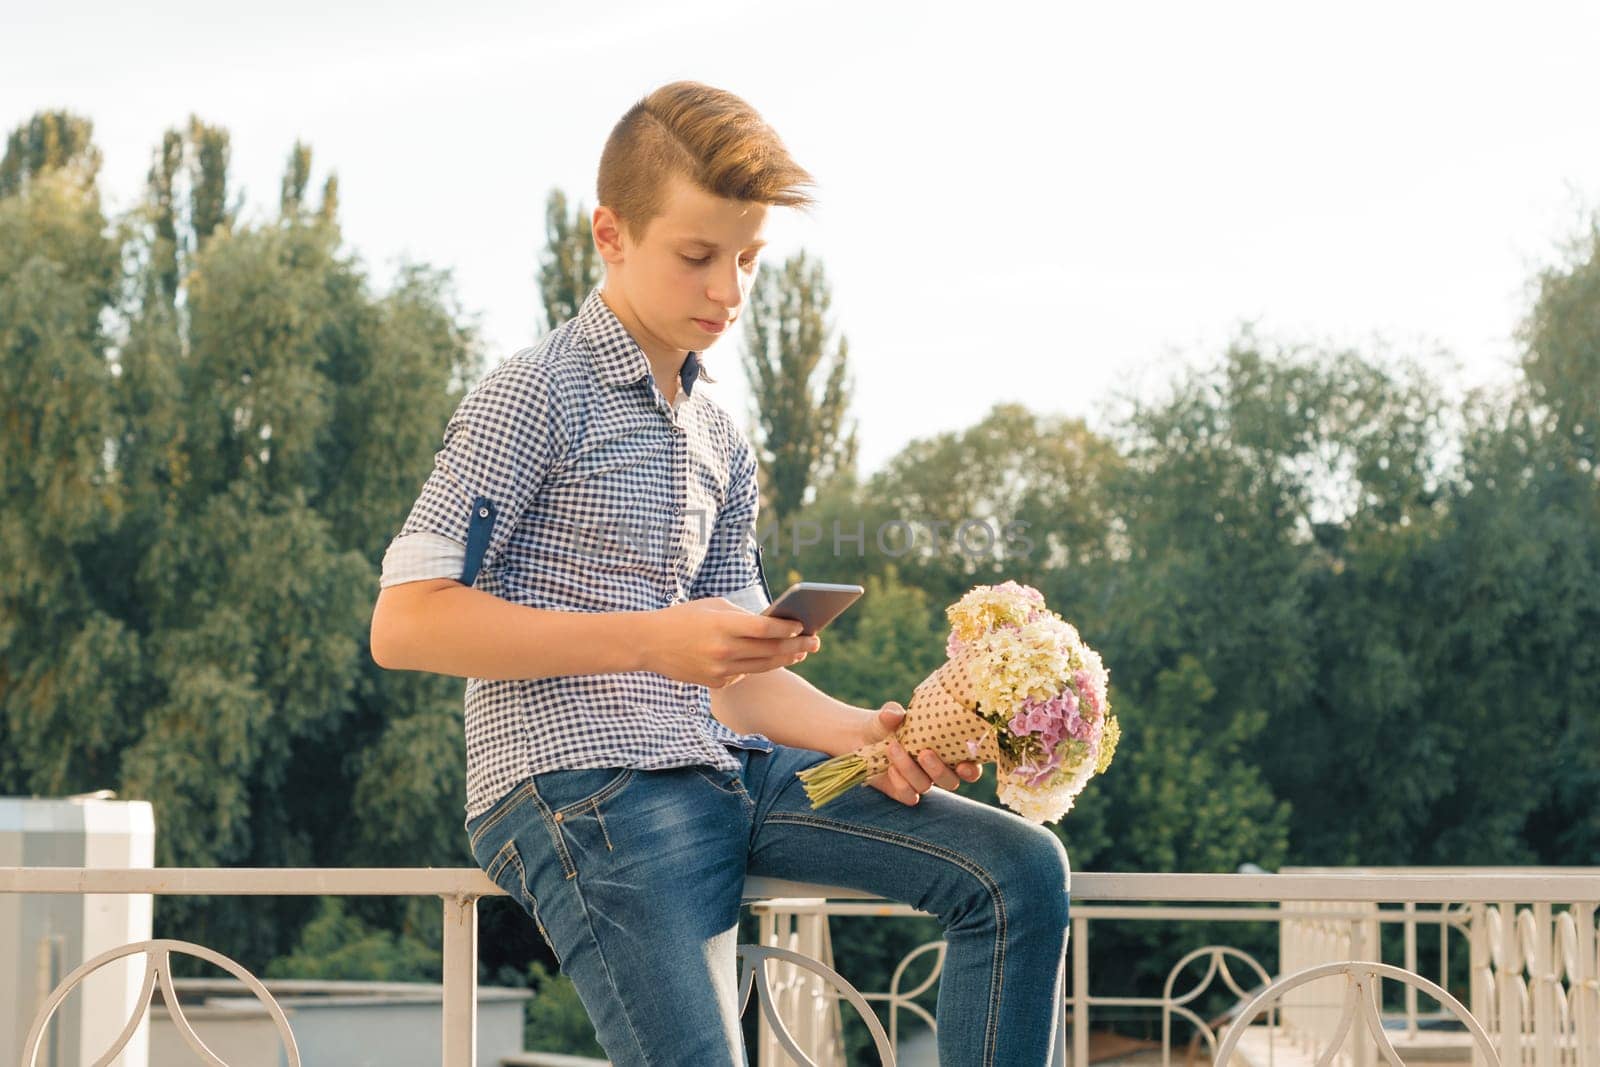 Outdoor portrait of teenage boy with bouquet of flowers, reading text on smartphone by VH-studio